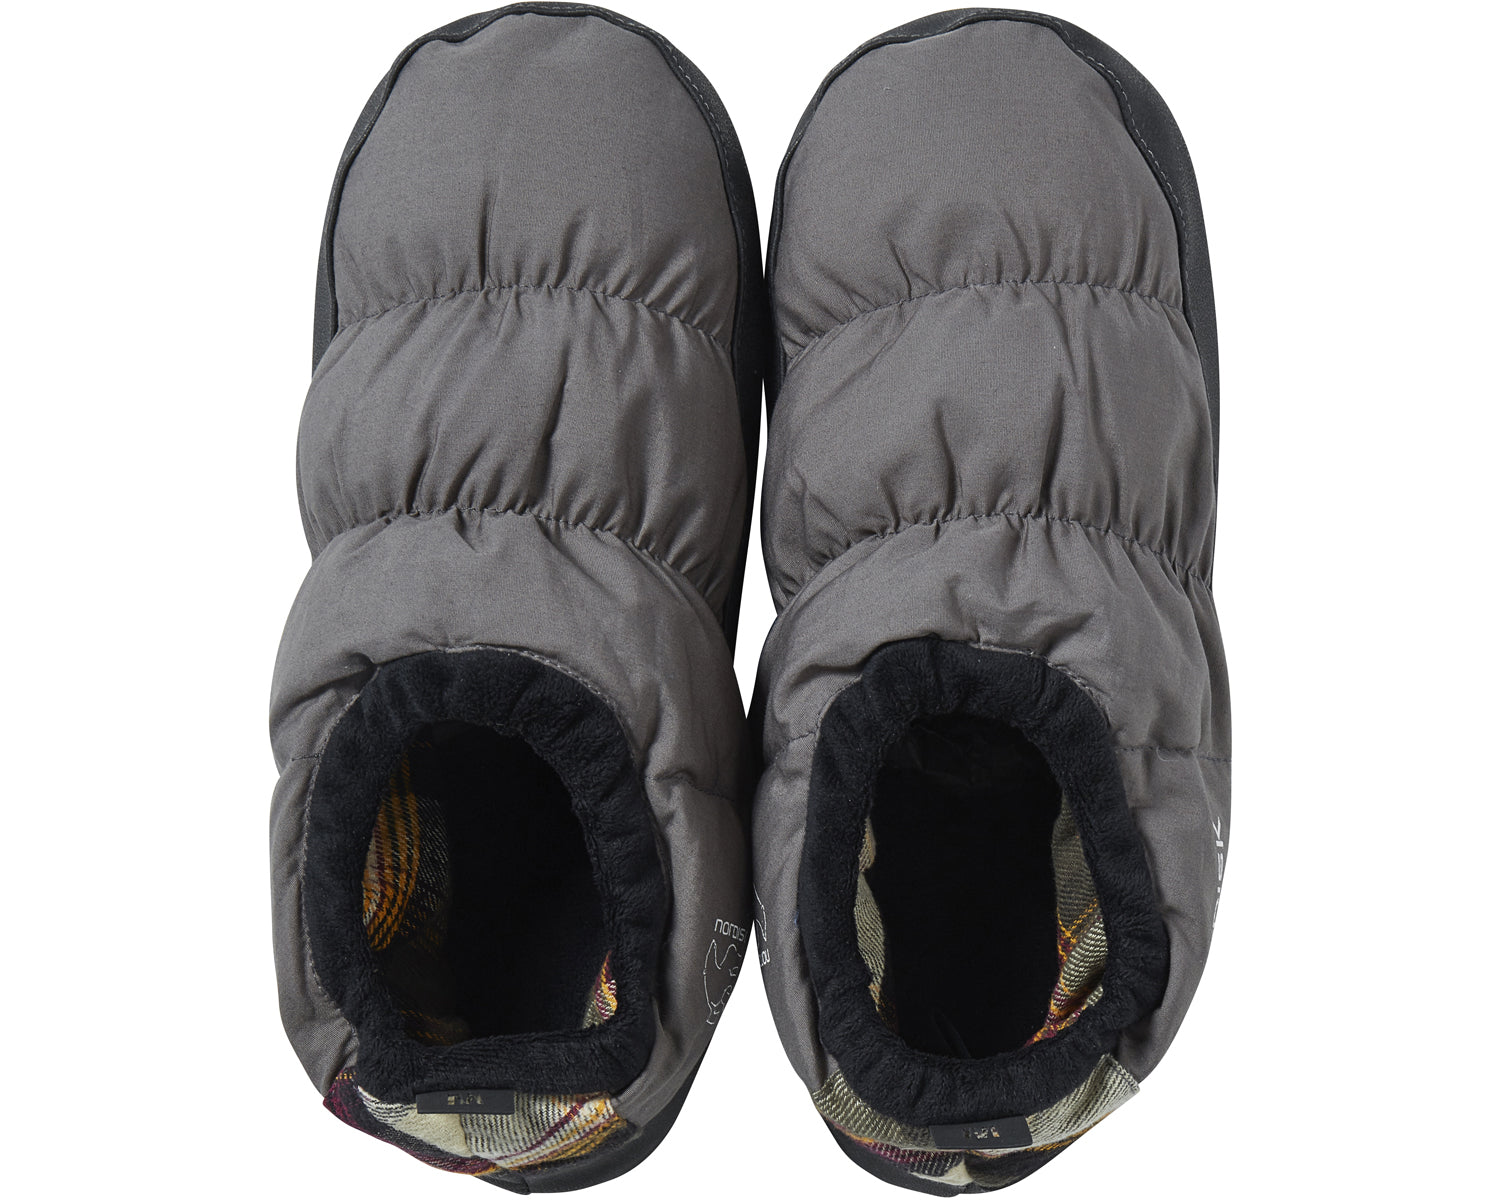 Hermod down slippers - Bungy Cord